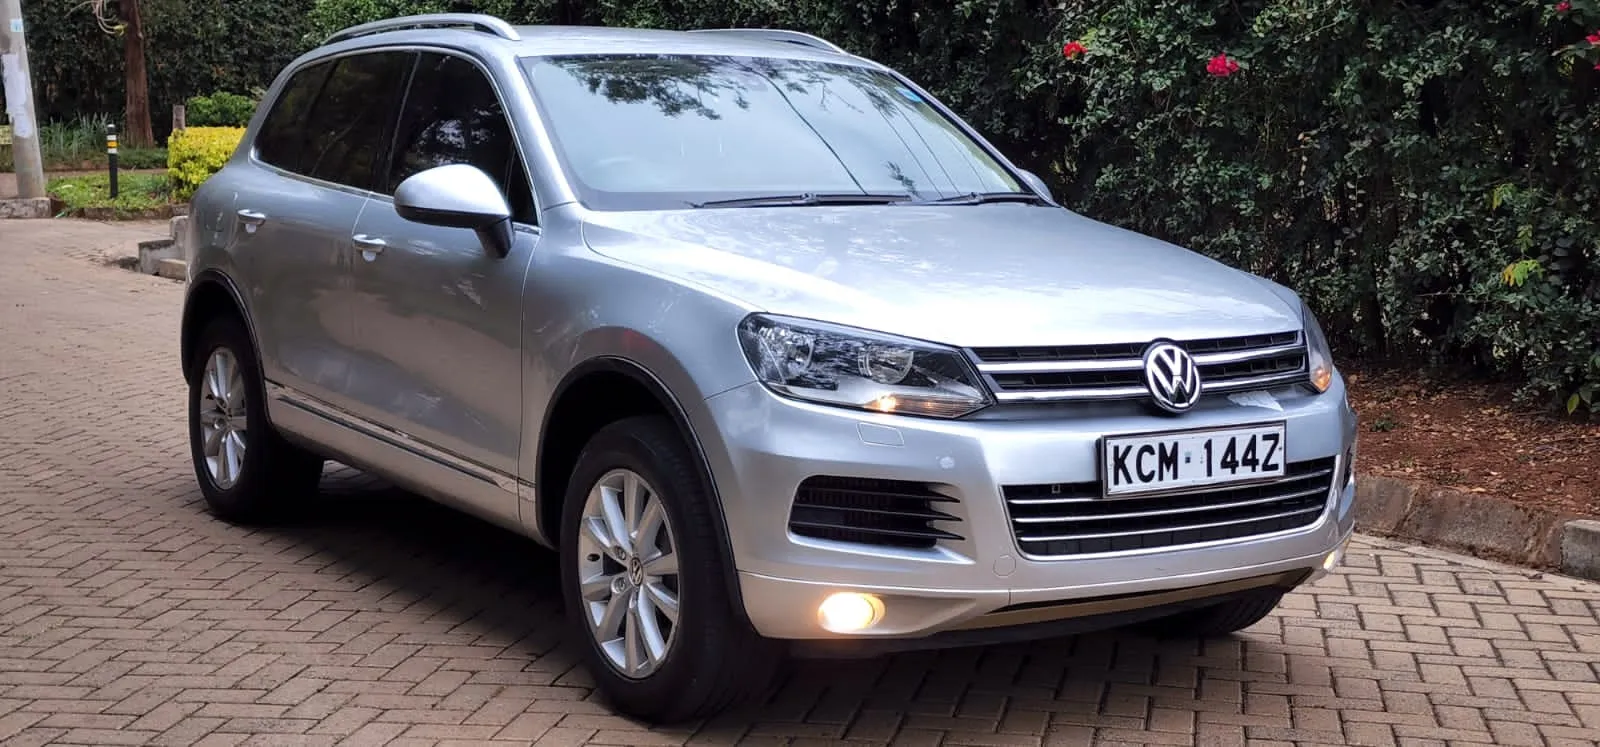 Volkswagen VW Touareg Pay 30% Trade in Ok Hot